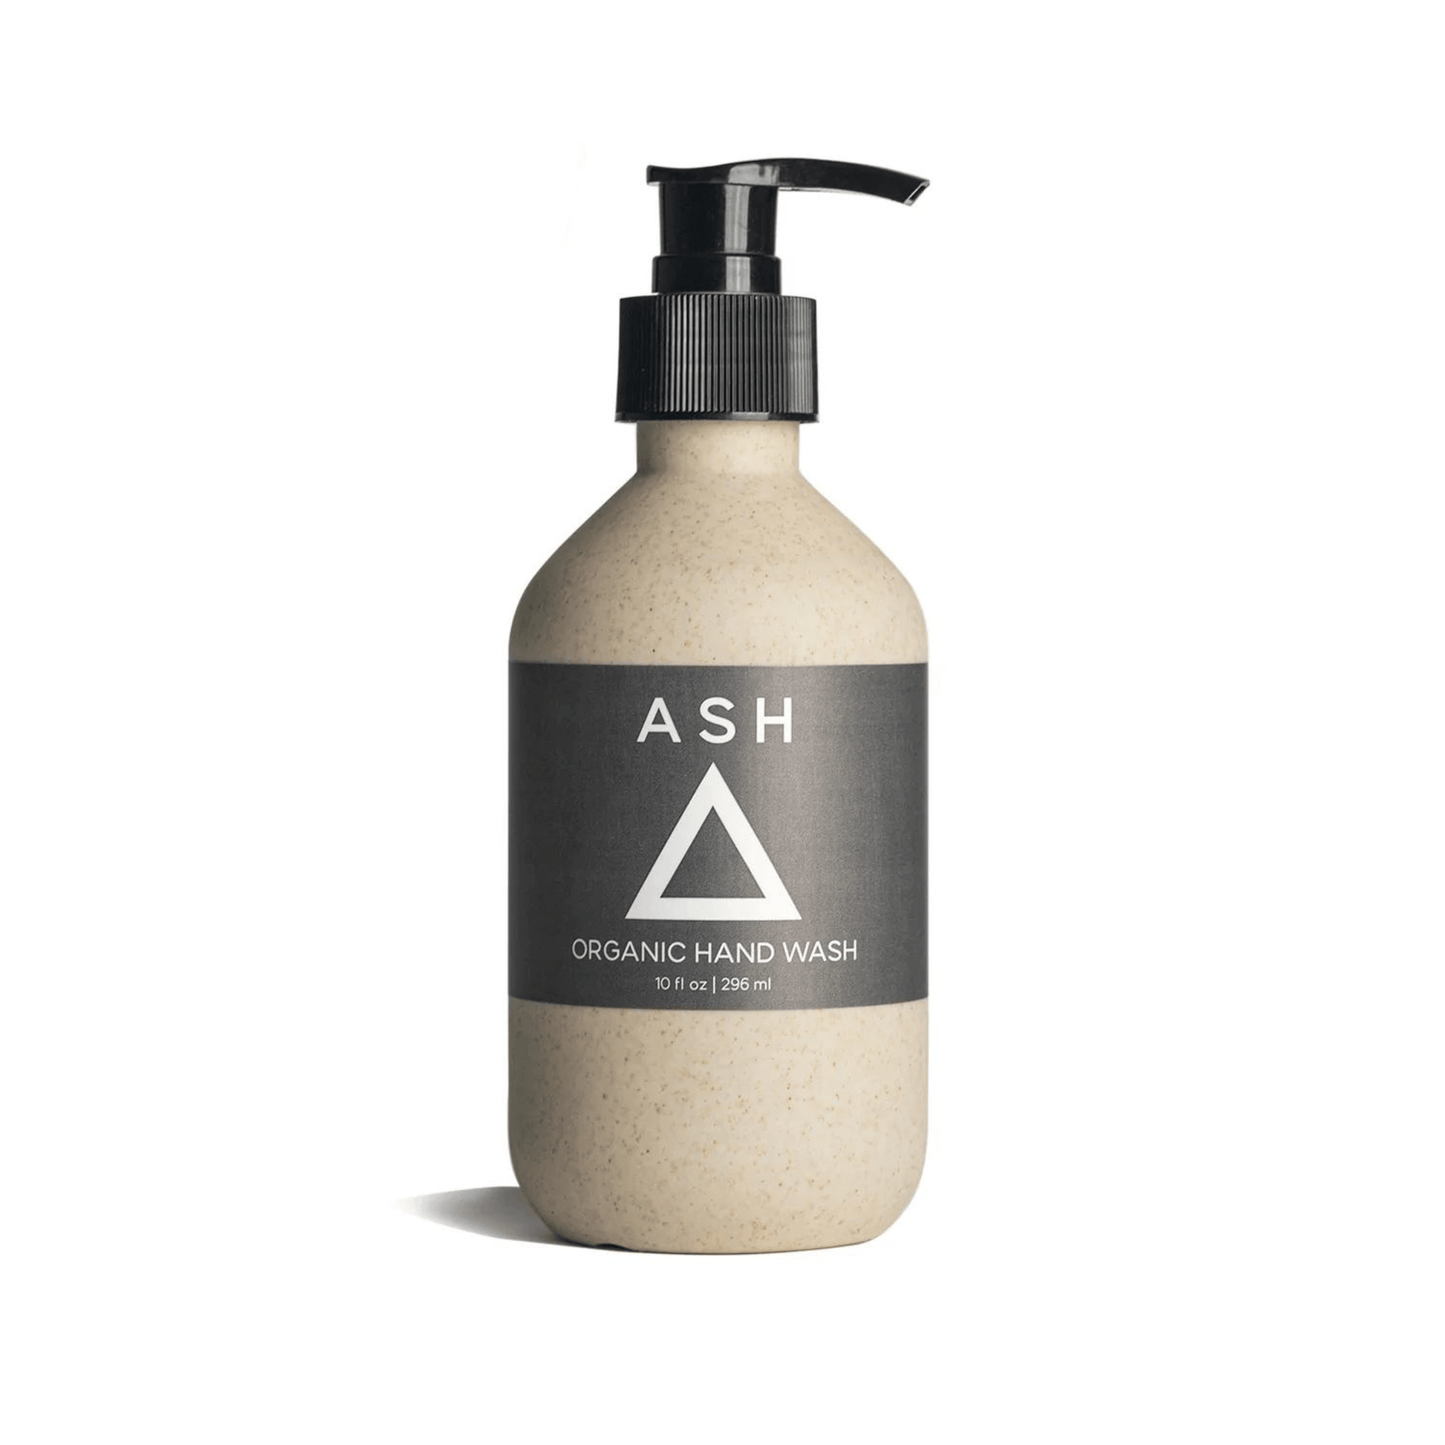 Primary Image of Iceland Volcanic Ash Hand Wash